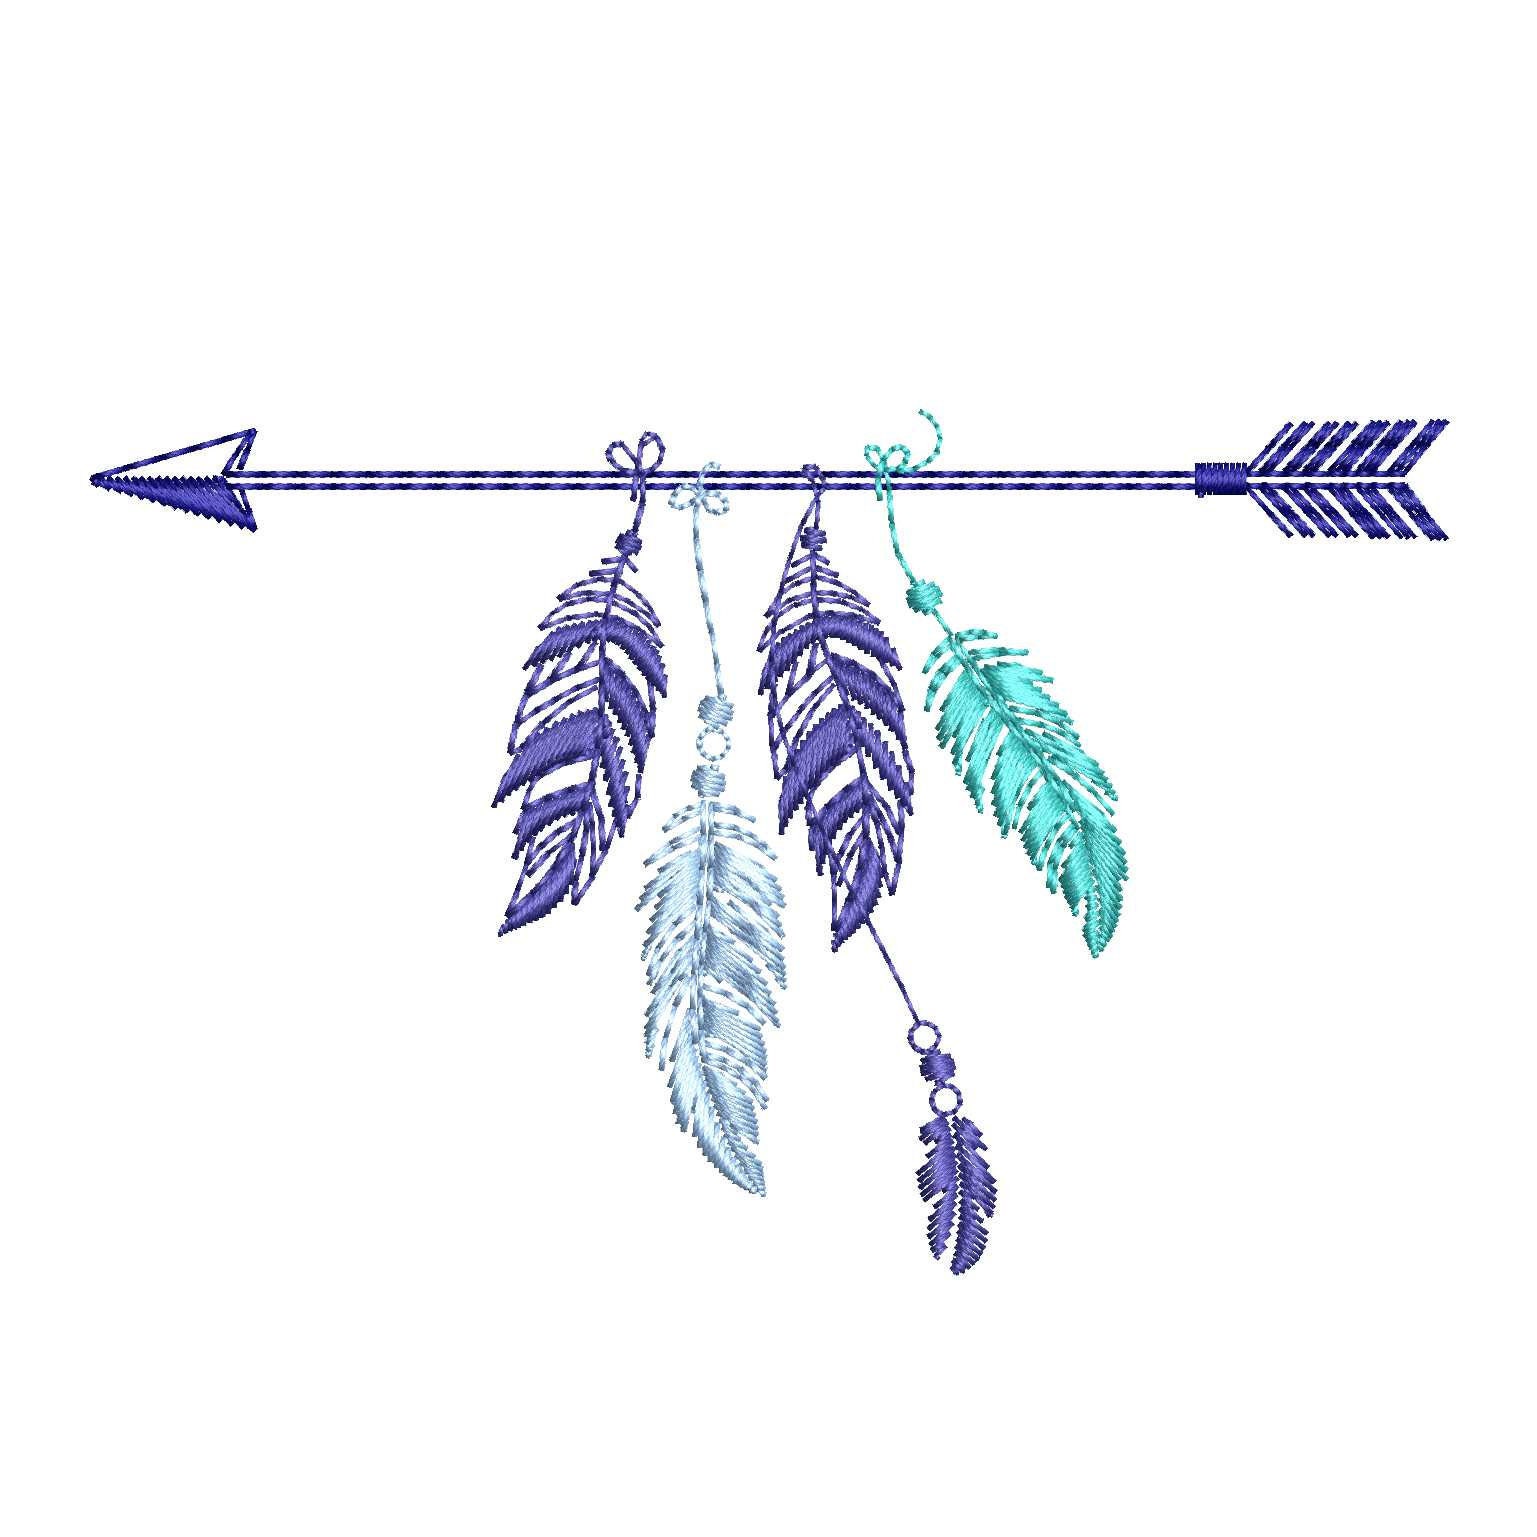 Arrow machine embroidery design for hoop 4x4 Embroidery Files Instant Download